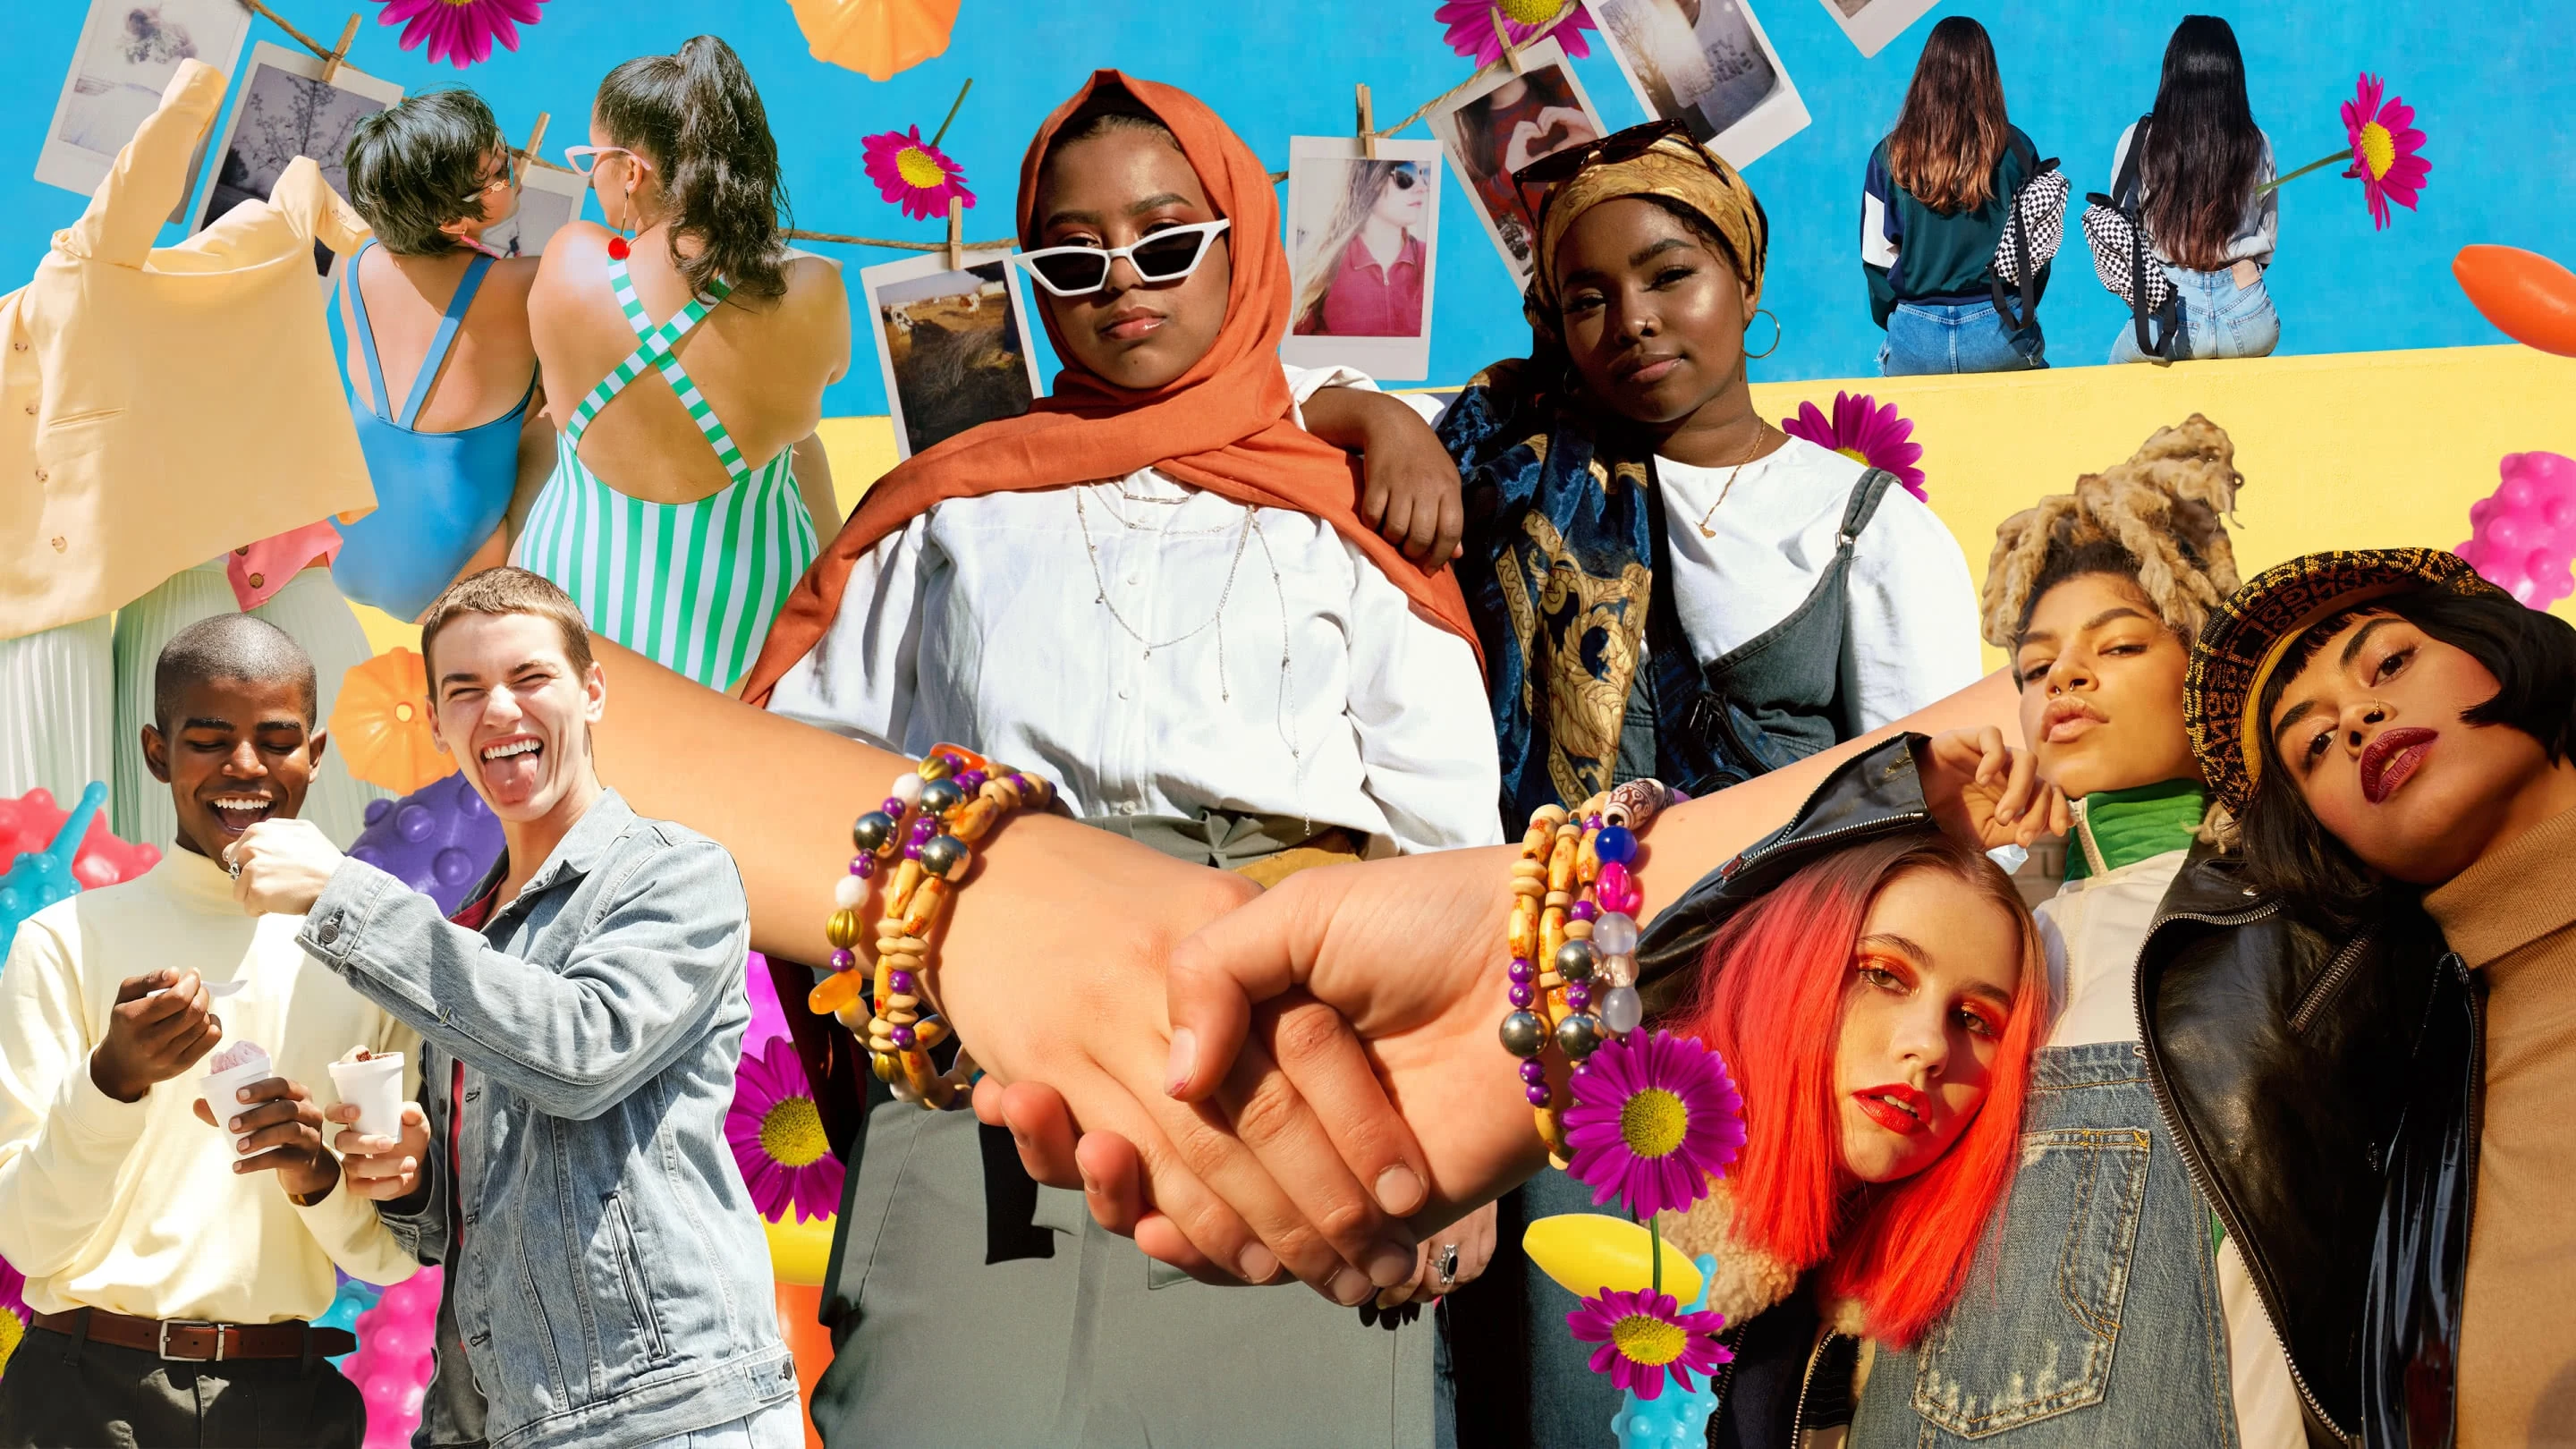 Colorful collage of friends of different races and ethnicities. Handshake at center, bright flowers and shapes in the background.